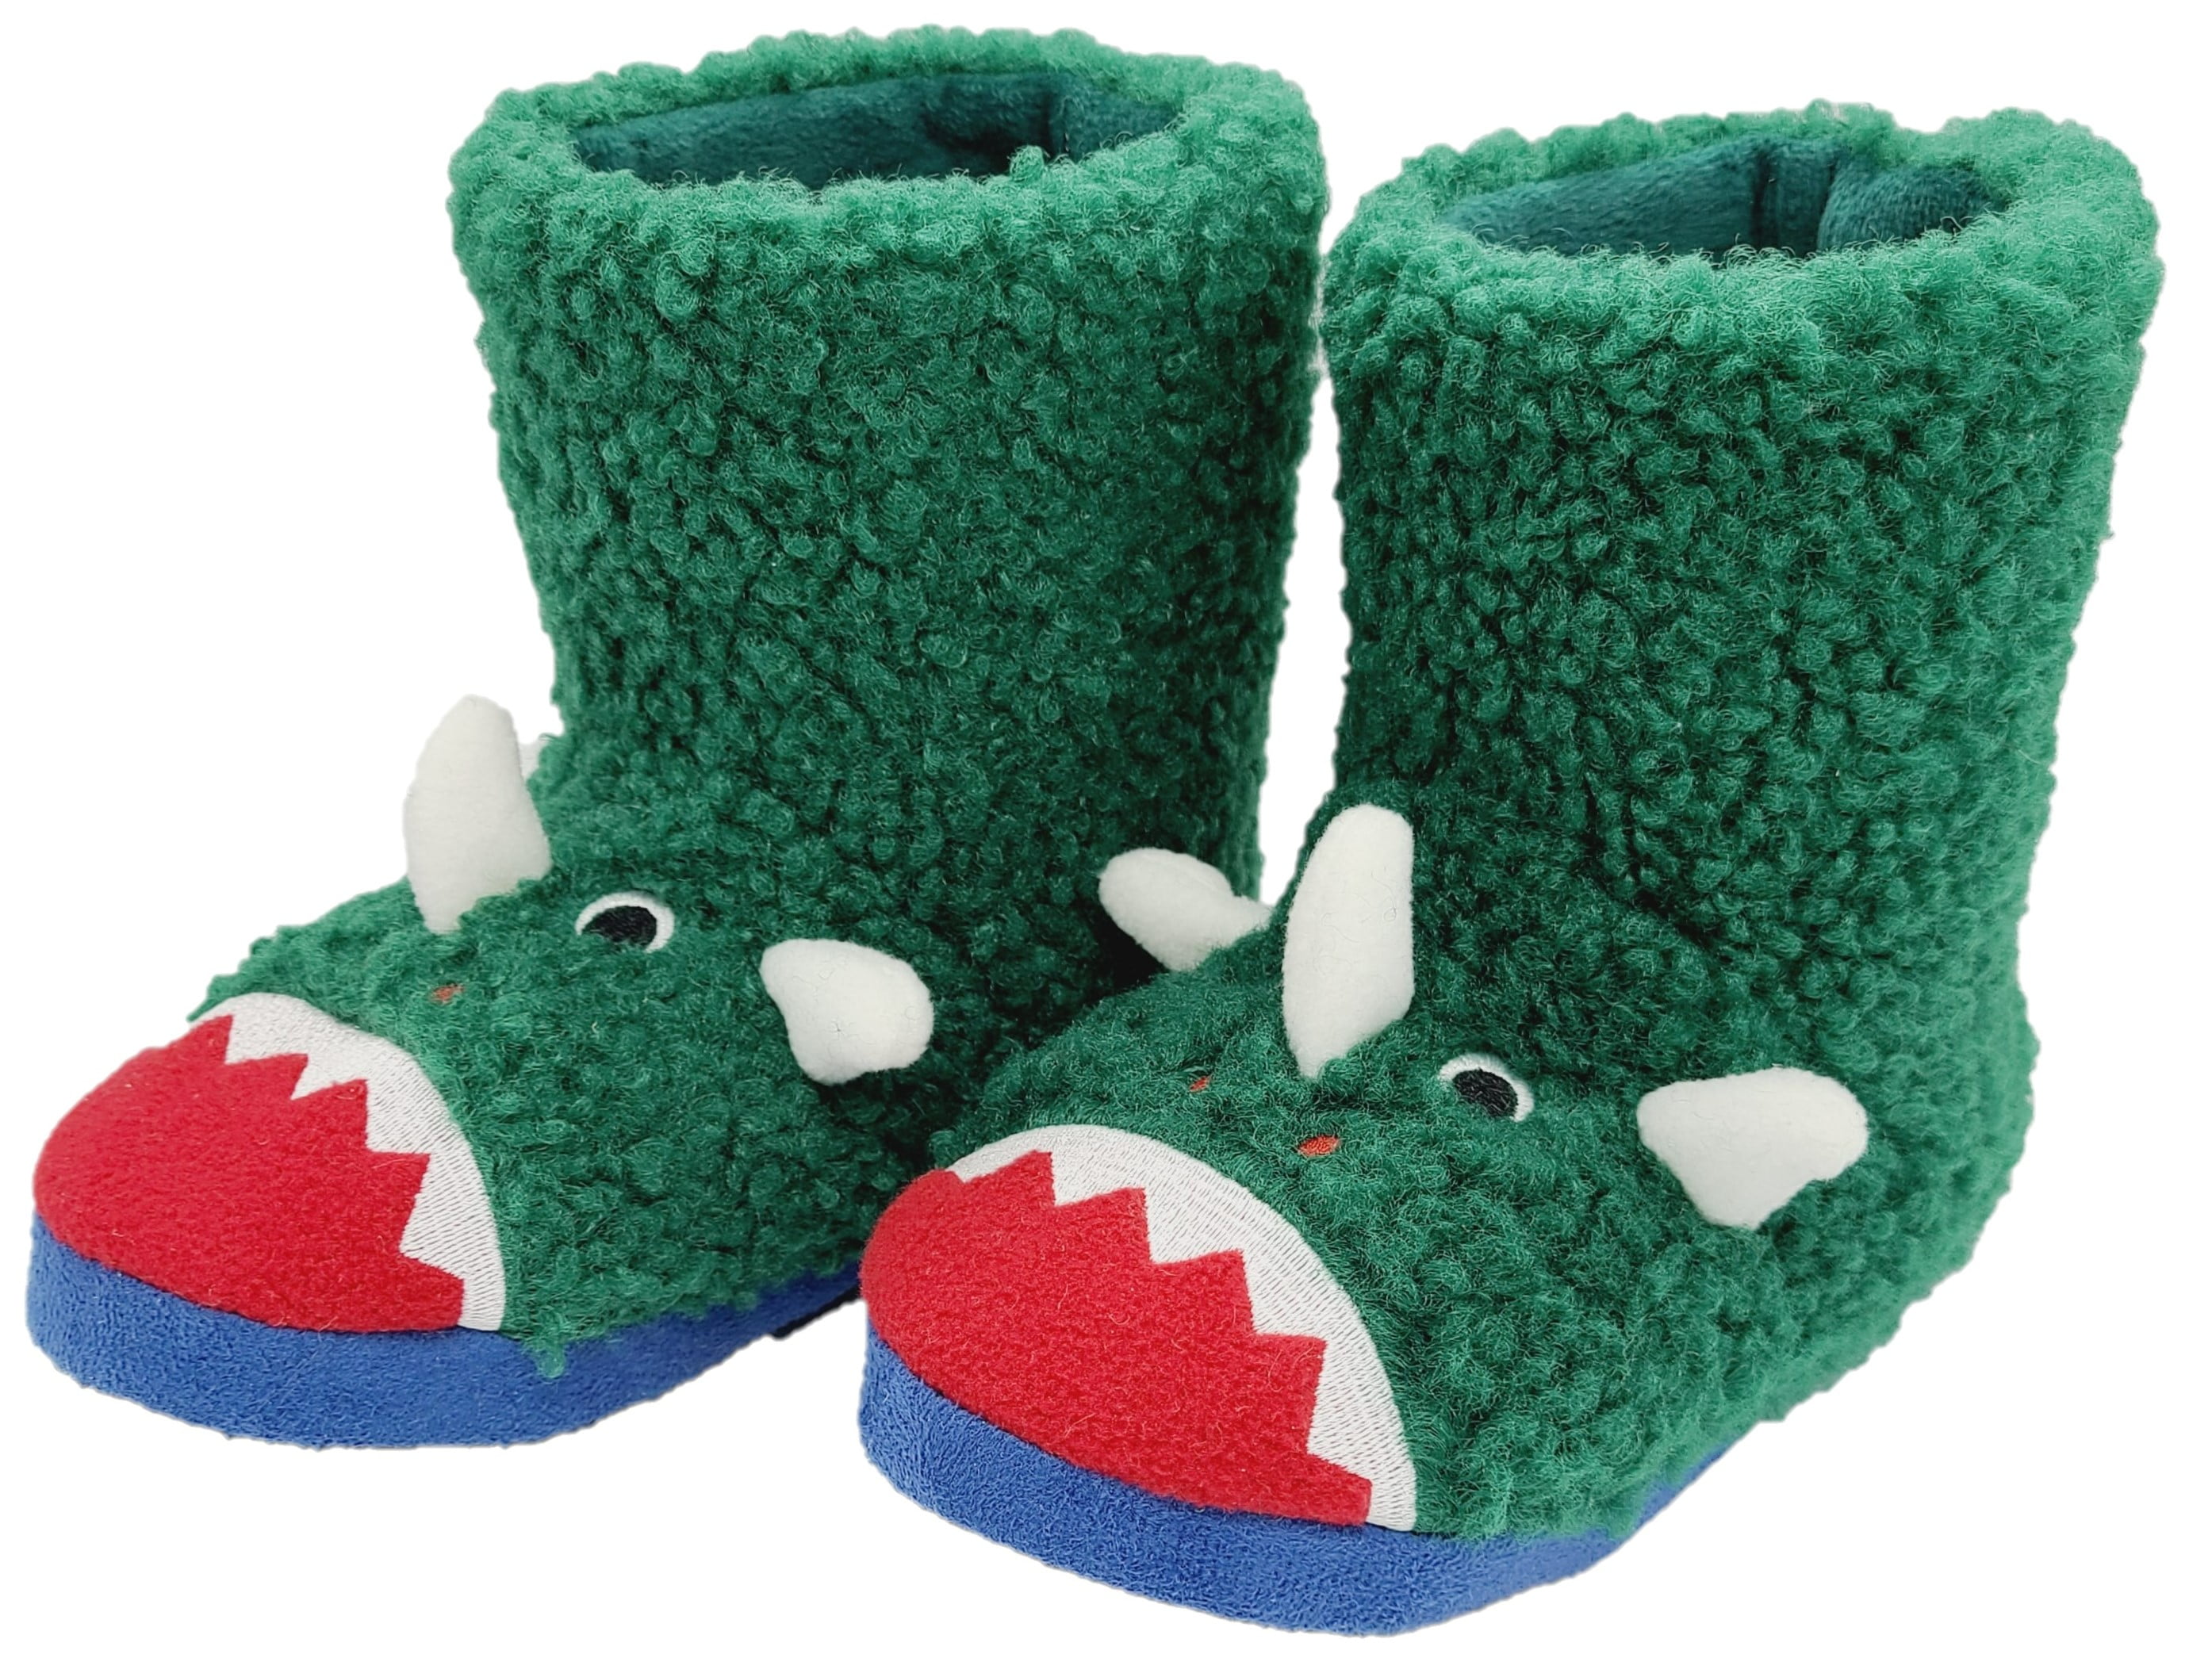 gift for kids Crocheted dinosaur slippers warm footwear Shoes Girls Shoes Slippers adult dinosaur slippers kid slippers gift for adults 